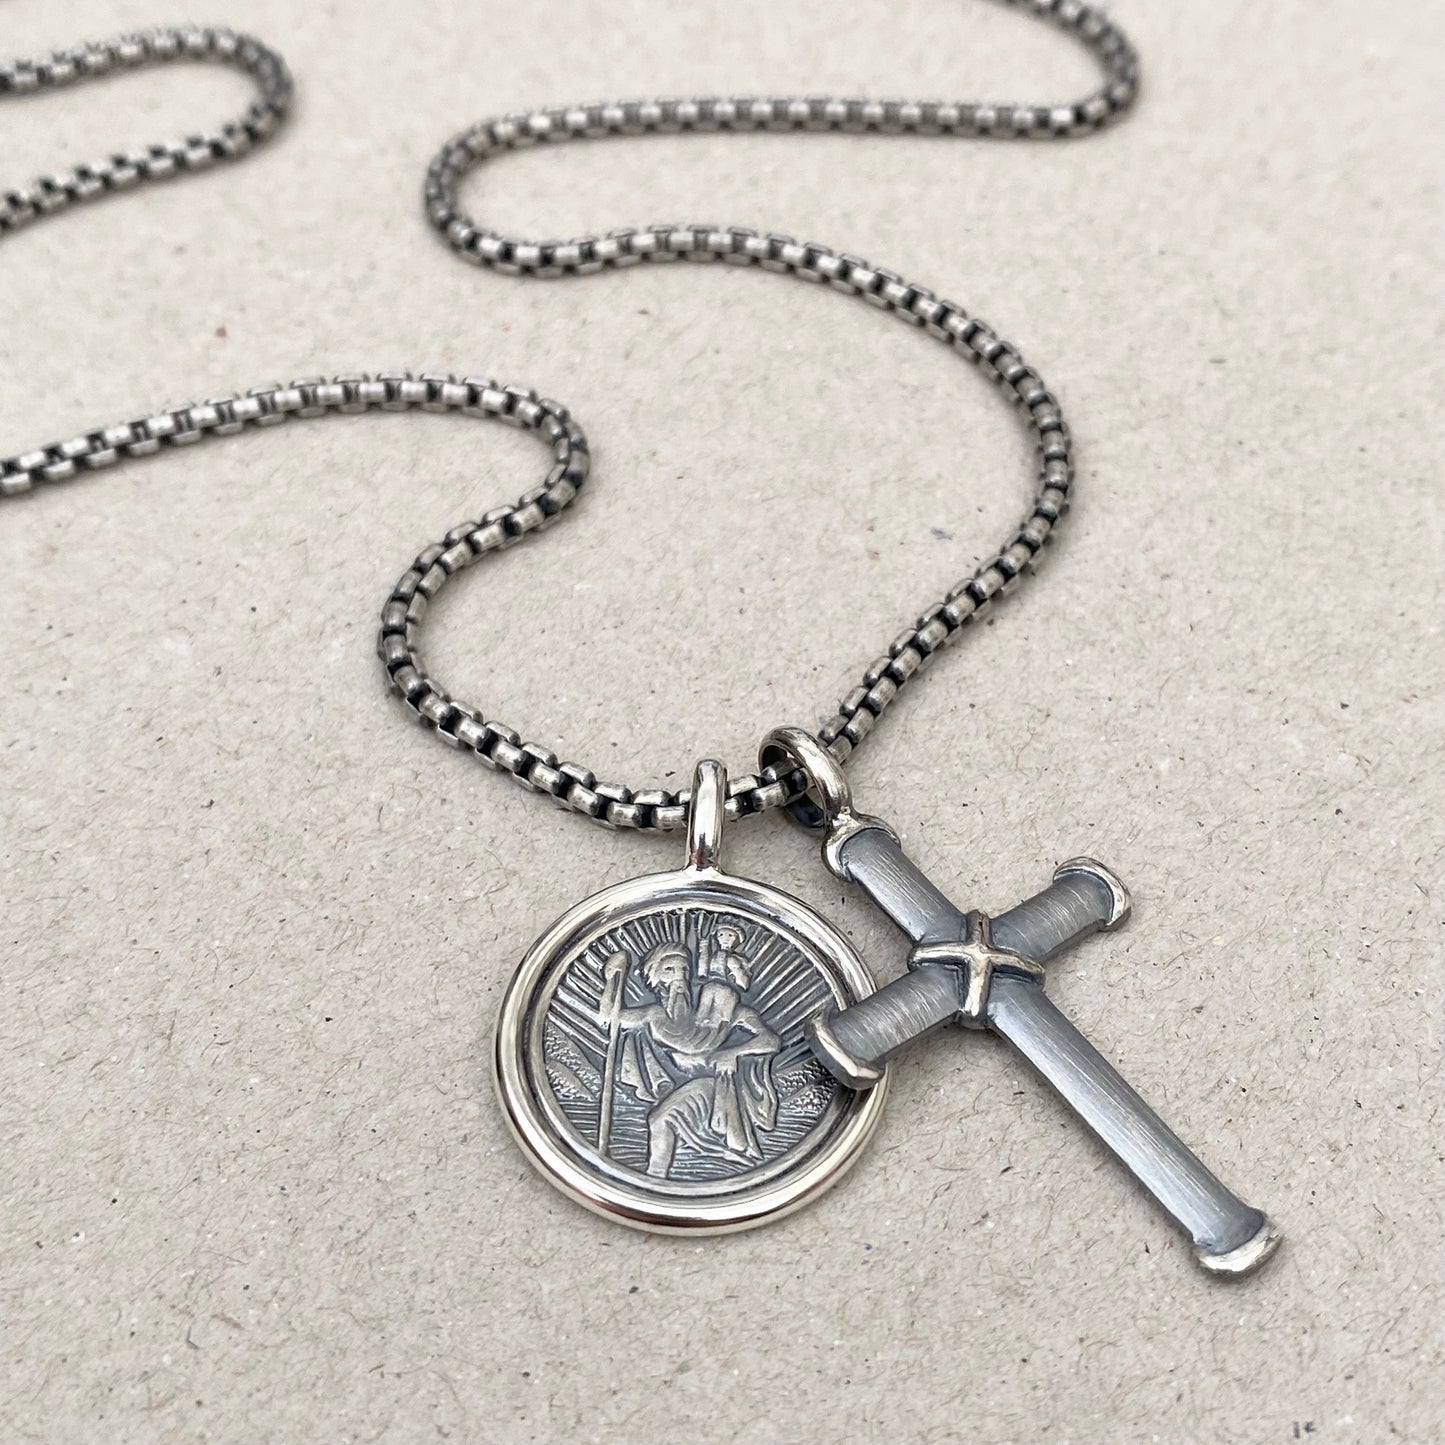 Handmade to order - Oxidised solid silver Saint Christopher framed pendant and criss cross on a 2.5mm wide round box belcher chain - Men's jewellery